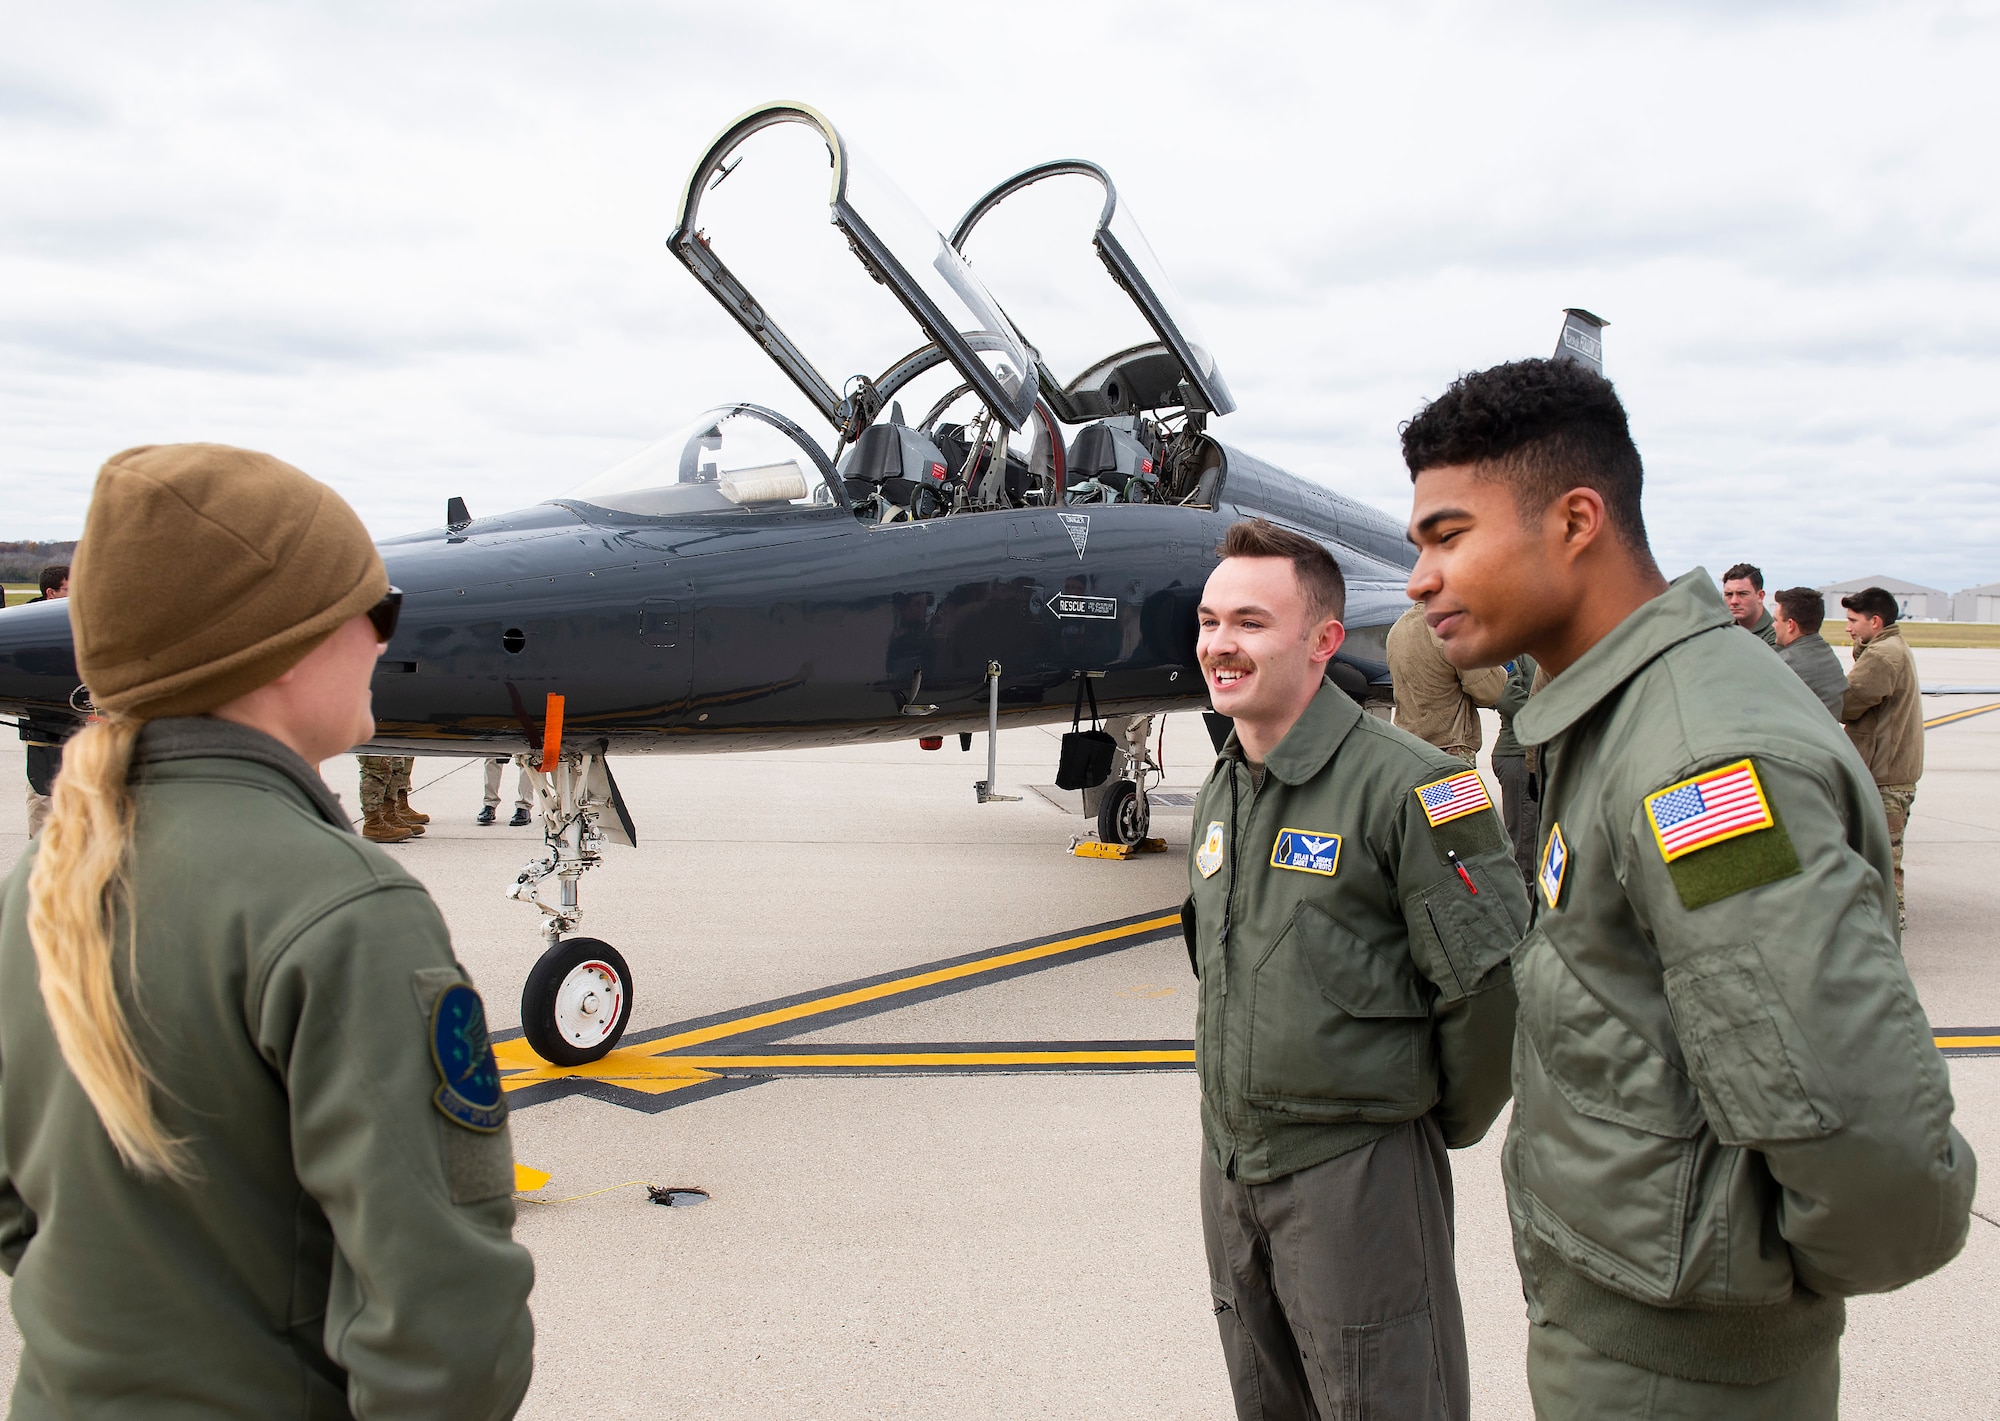 Maj. Sarah Kociuba, 393rd Bomb Squadron pilot, visits with Air Force ROTC cadets Dylan Shope (left) and Chris Davis on Nov. 15, 2021, at Wright-Patterson Air Force Base, Ohio. Kociuba, who led the three-bomber flyover at the Super Bowl in February, came back to Wright-Patt to visit with cadets from the ROTC unit she was a member of 10 years ago. (U.S. Air Force photo by R.J. Oriez)